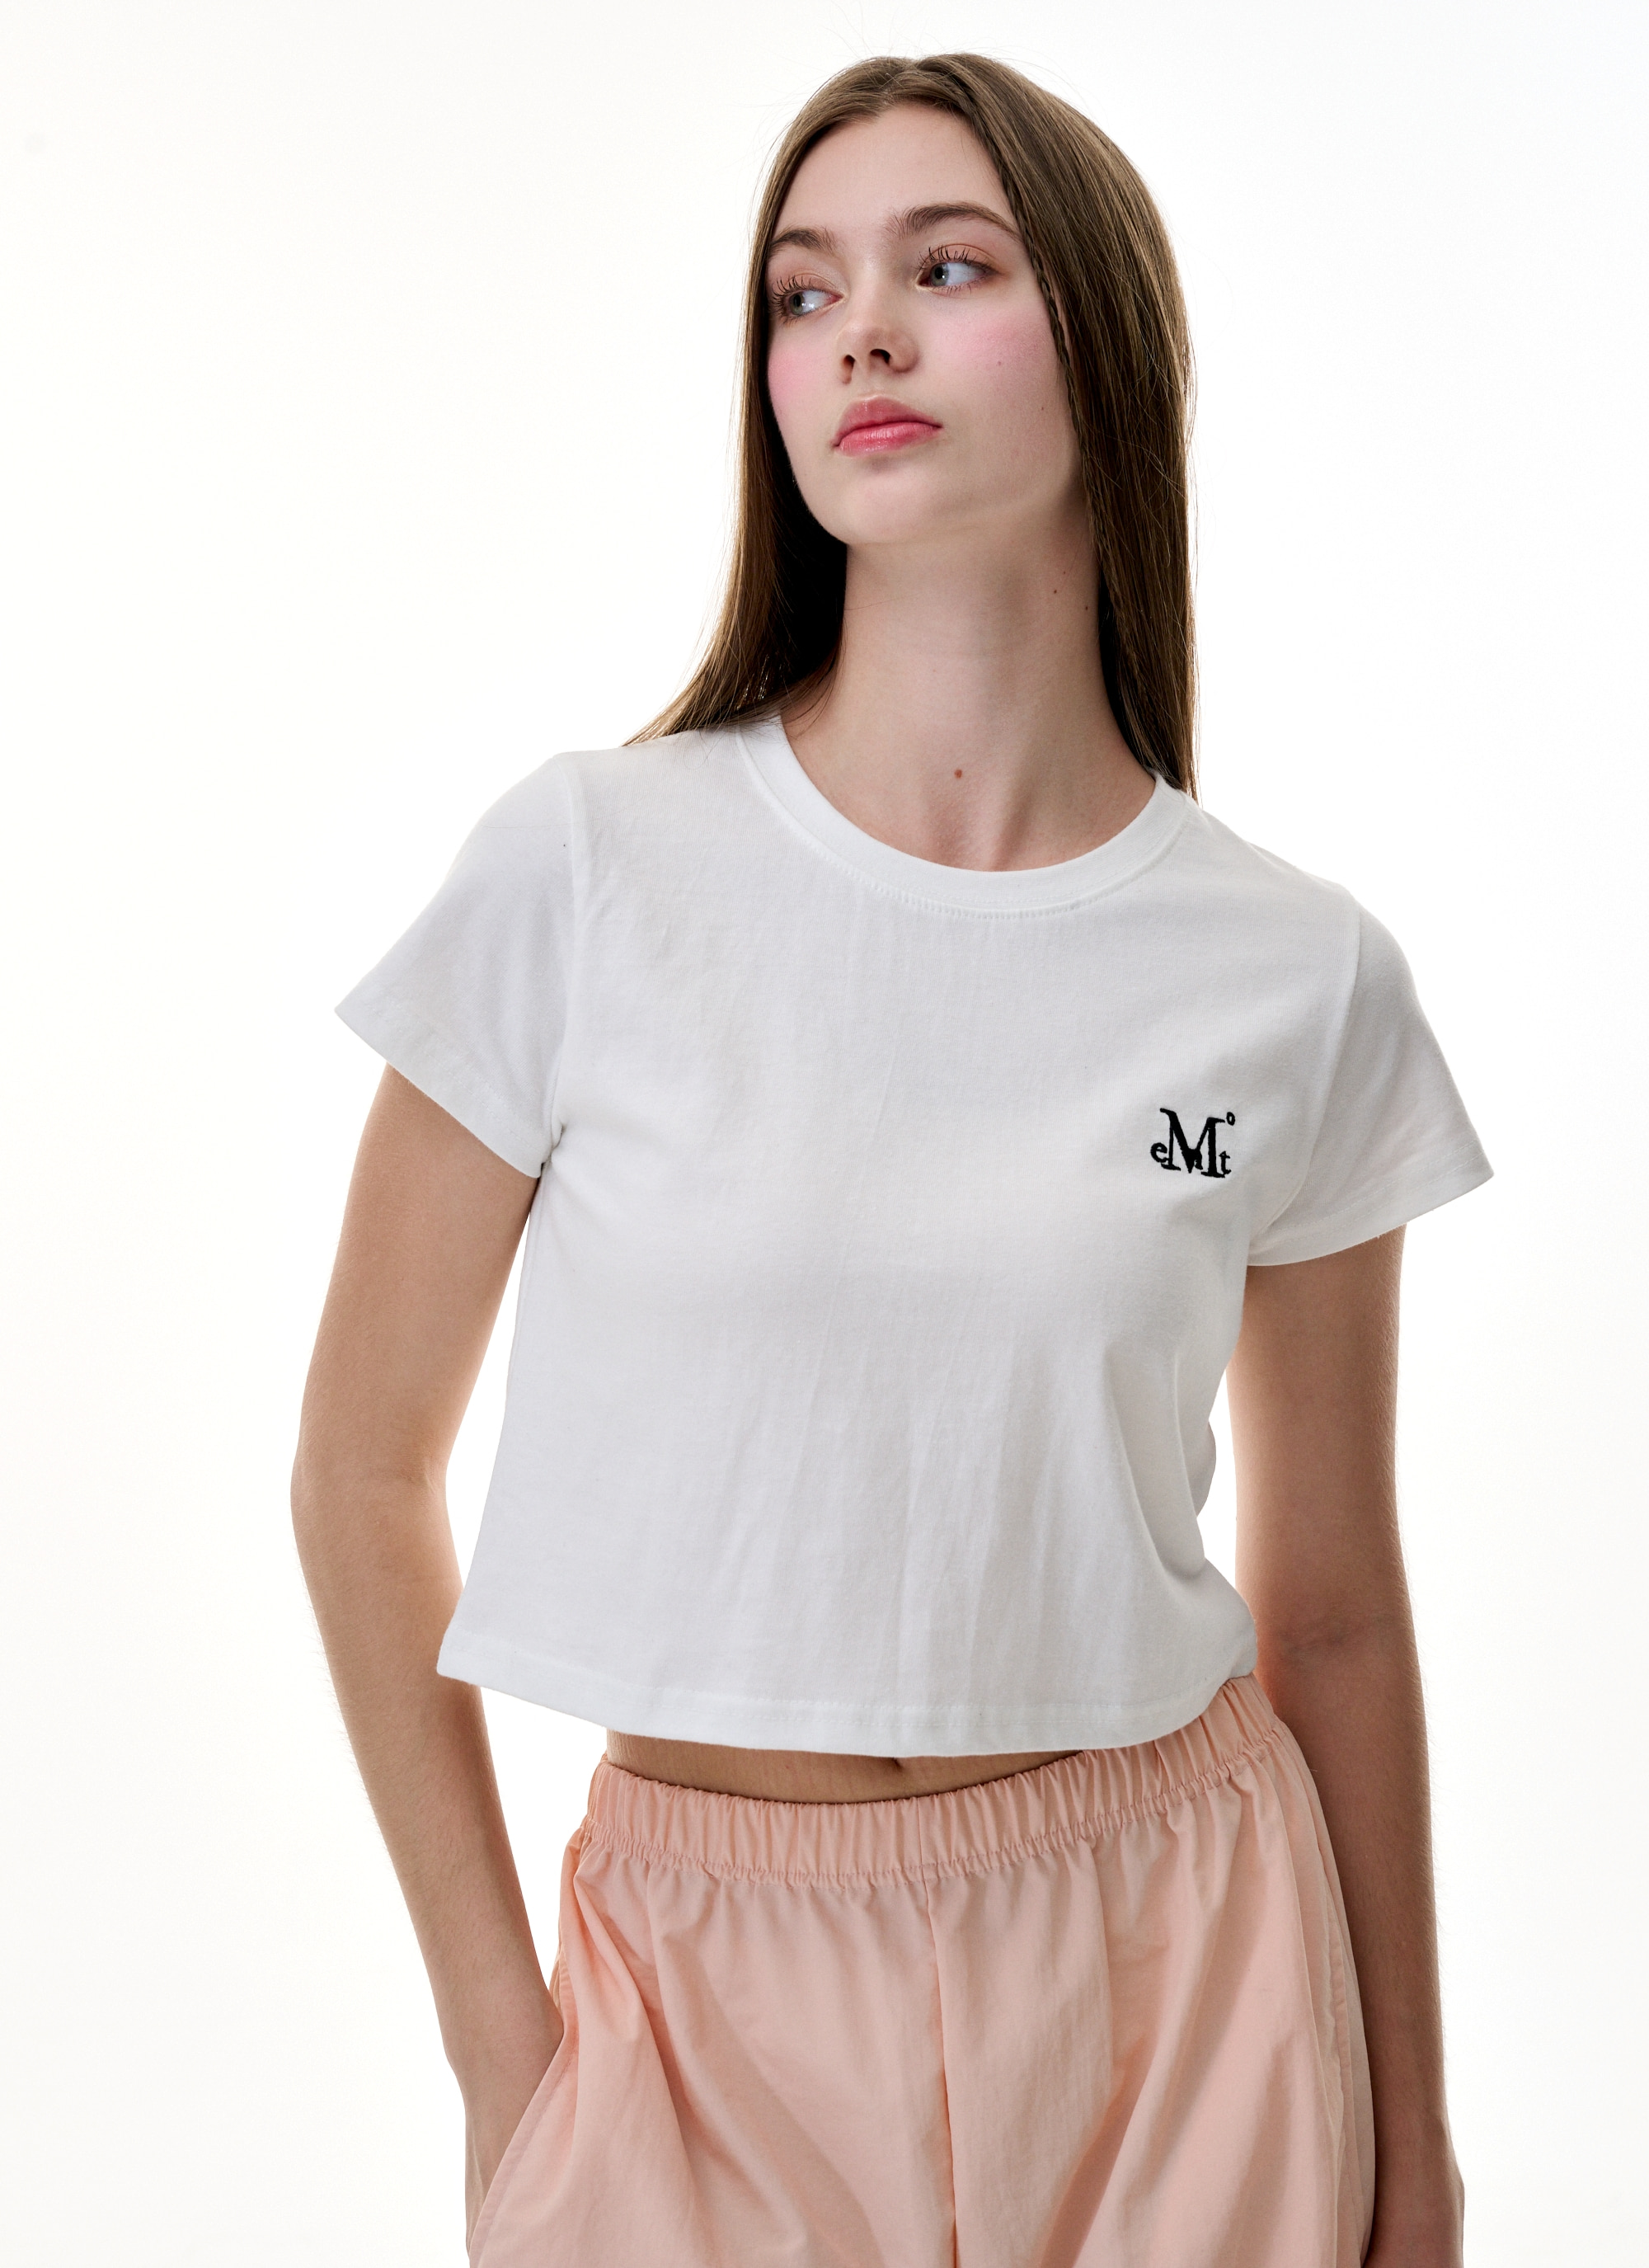 MUCENT SMALL LOGO T (White)